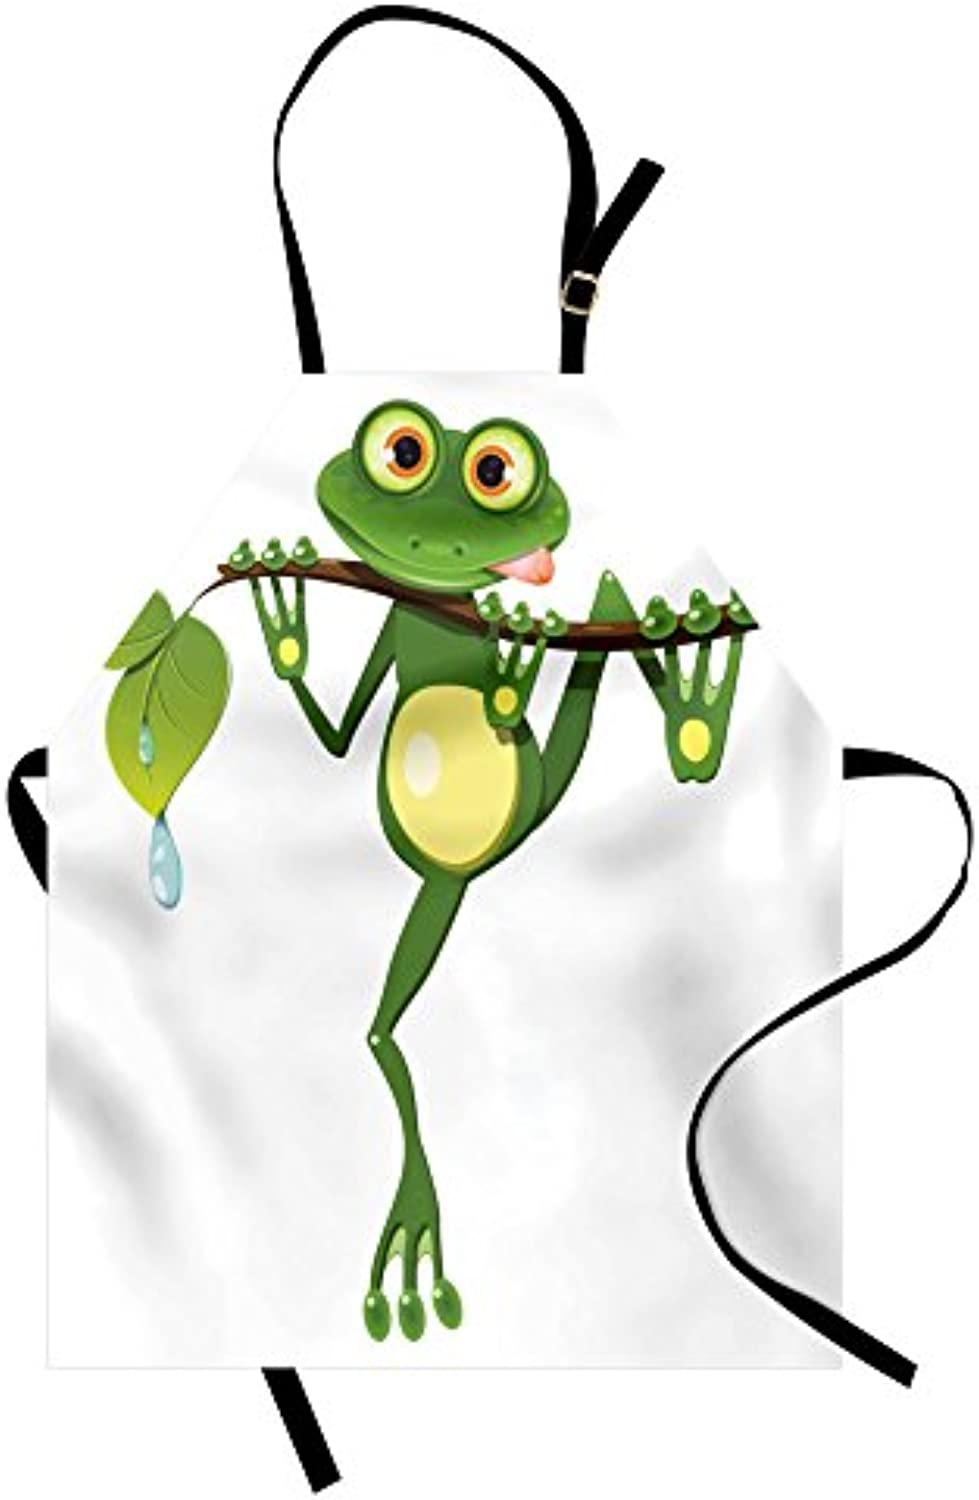 Granbey Animal Apron  Little Frog on Branch of the Tree in Rainforest Nature Jungle Life Art Earth  Unisex Kitchen Bib with Adjustable Neck for Cooking Gardening  Adult Size  Green White